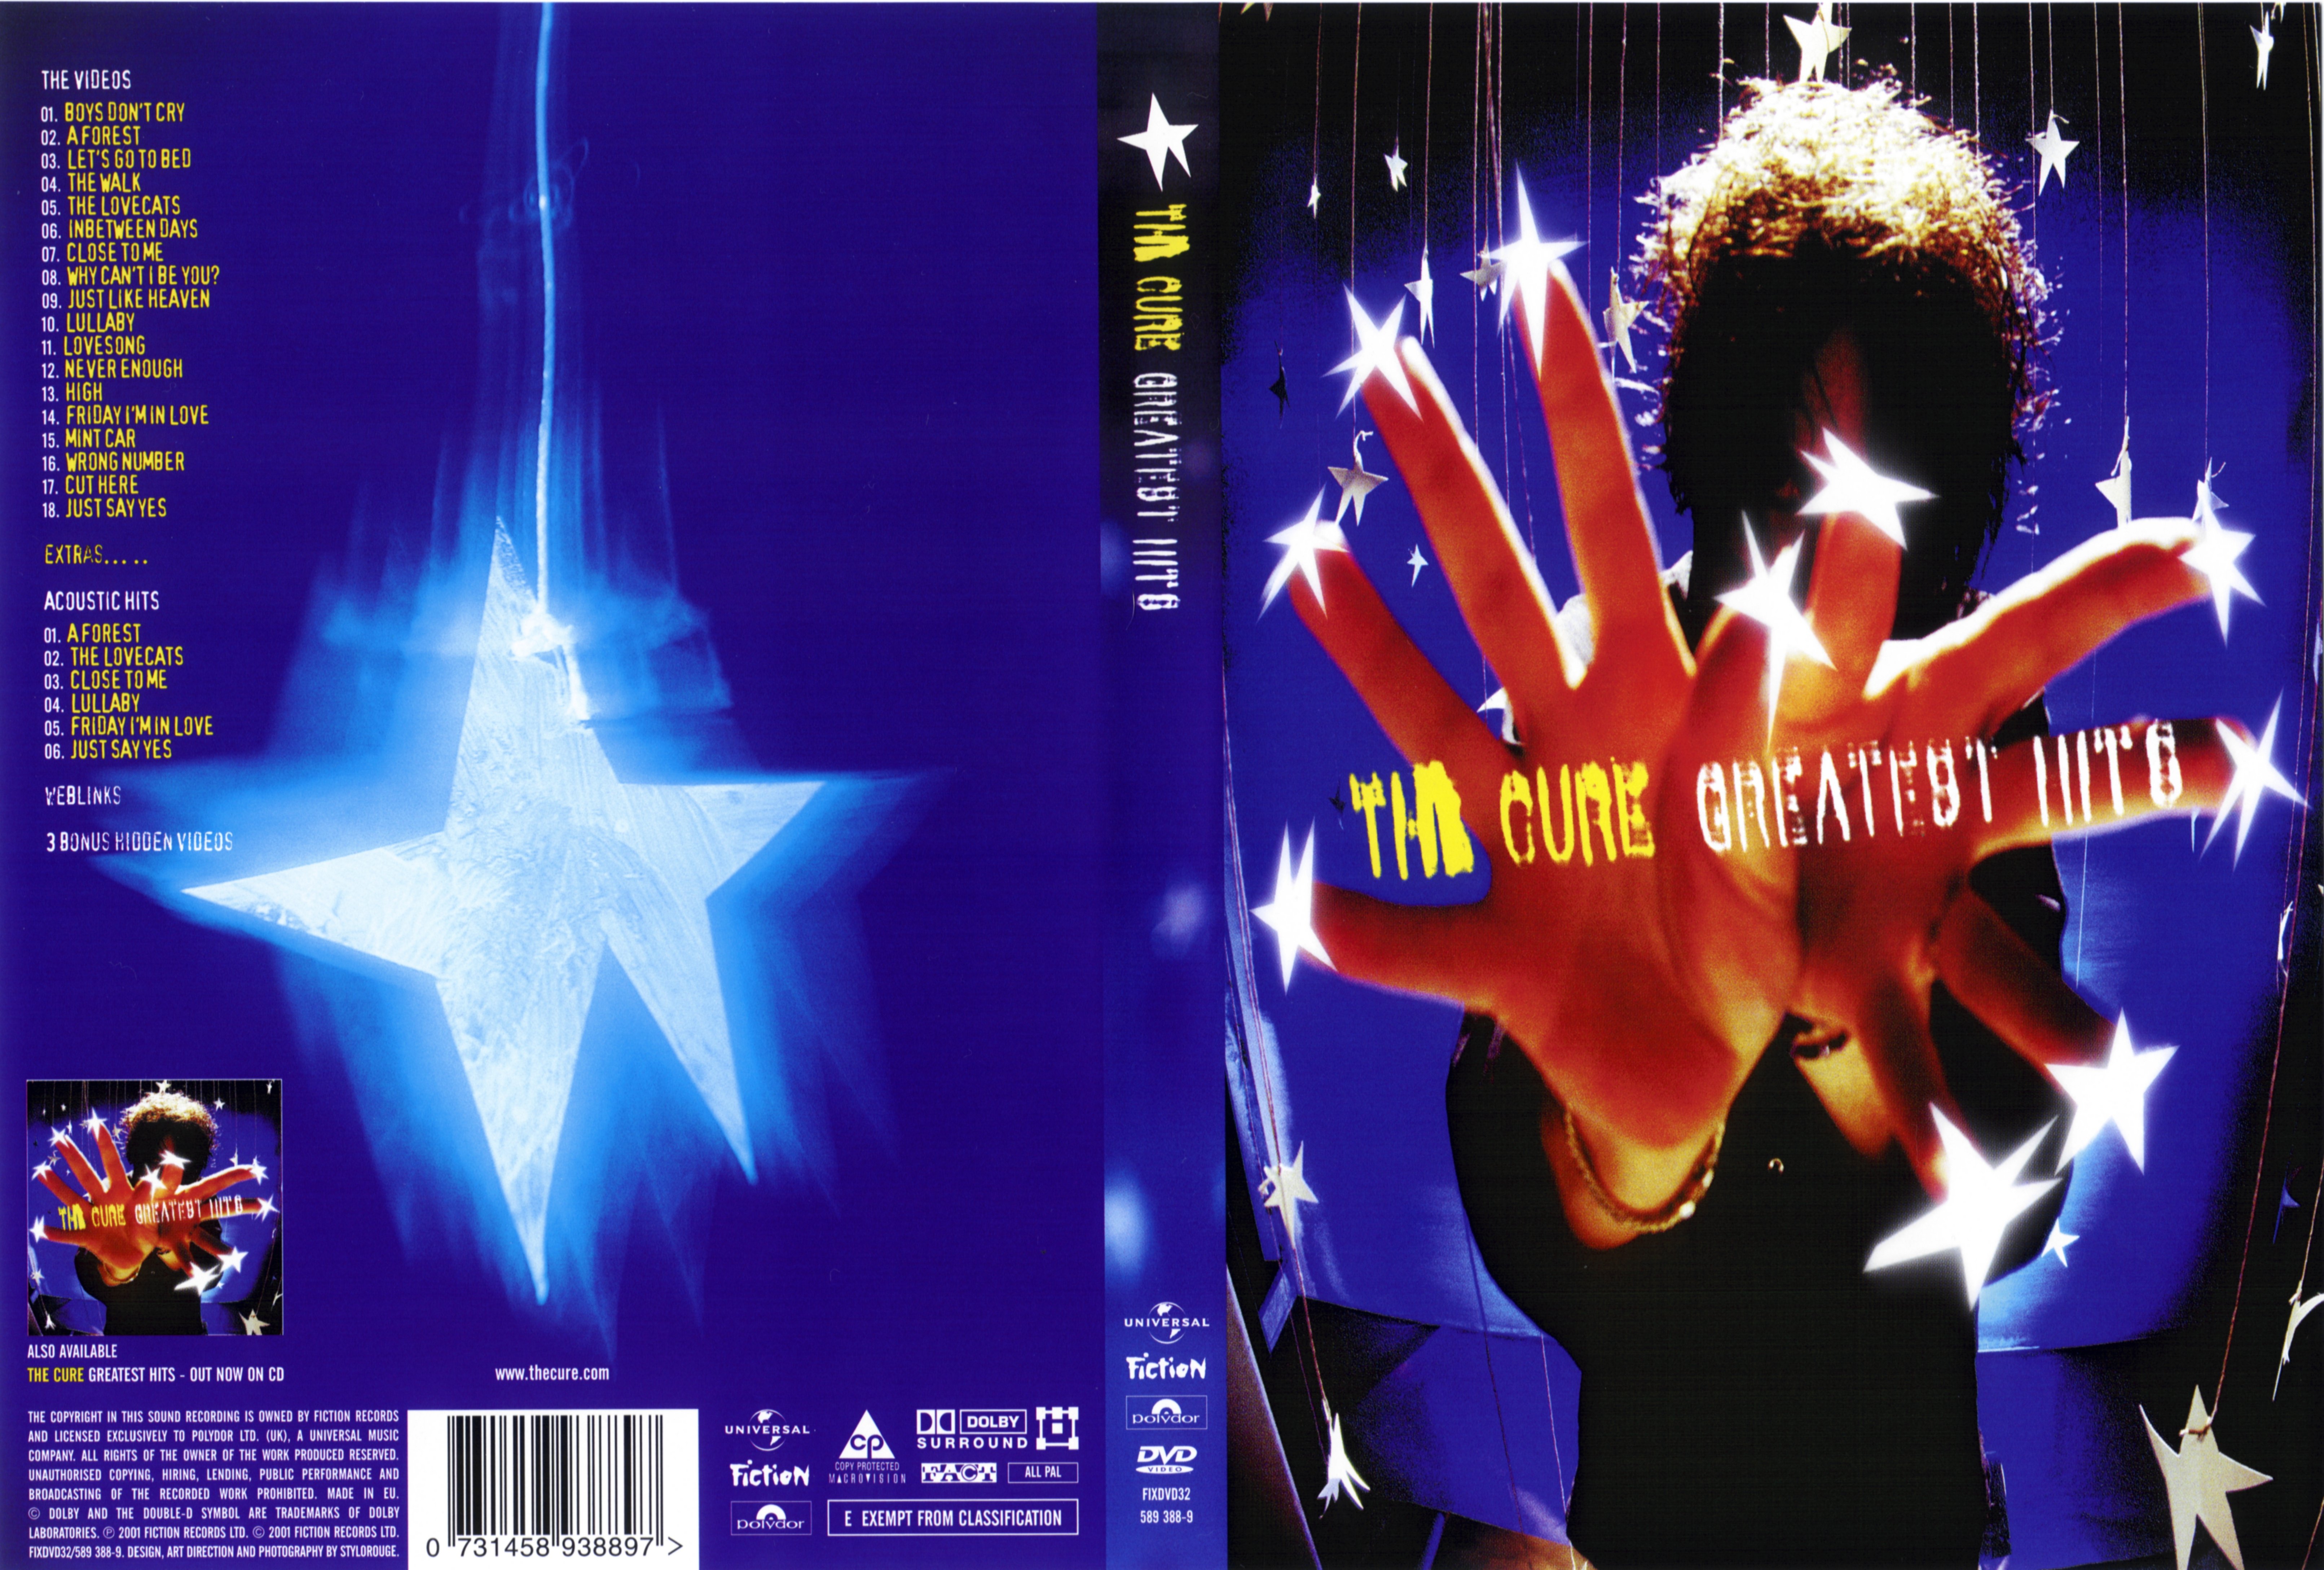 Jaquette DVD The cure greatest hits